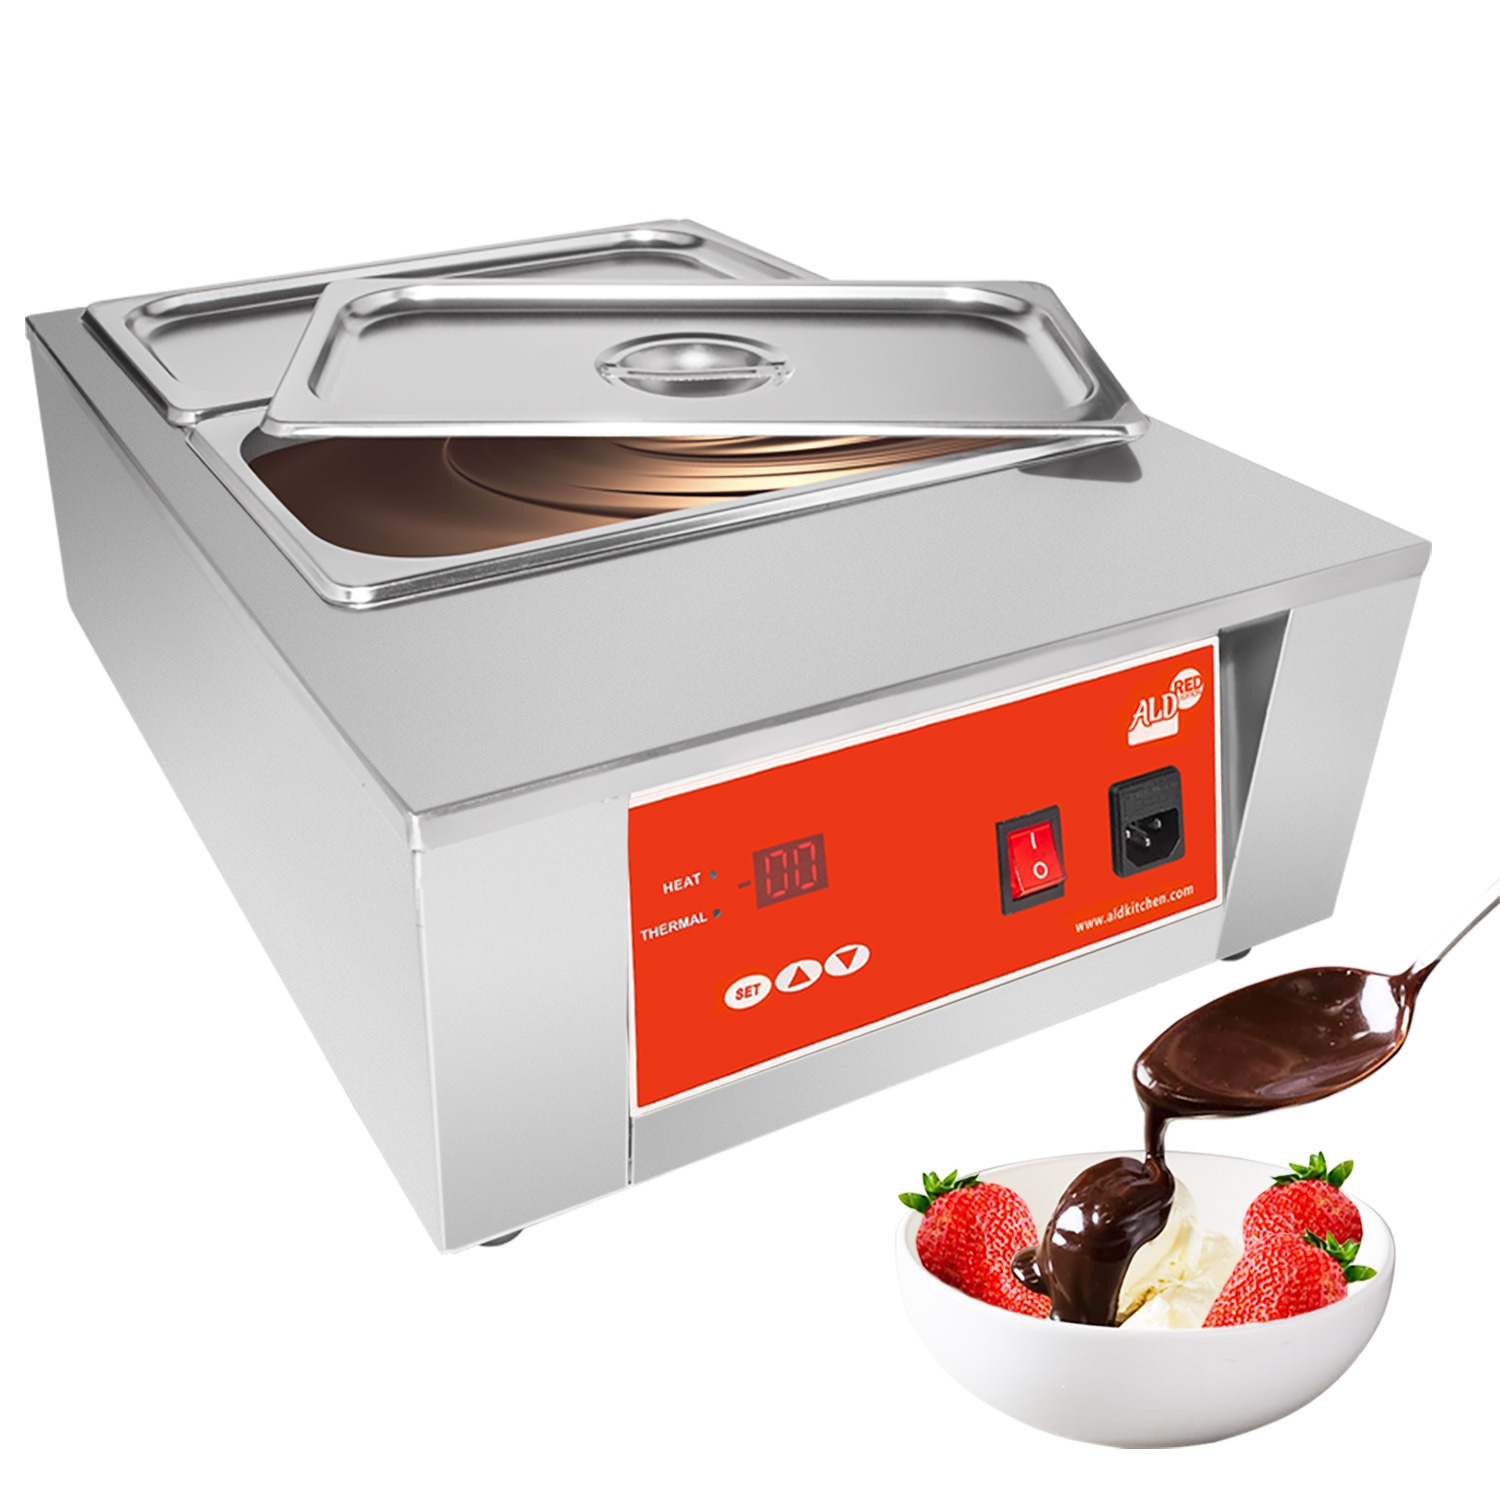 Digital Electric Chocolate Melter | 8 kg Commercial Chocolate Heater | 2 Tanks | 110V